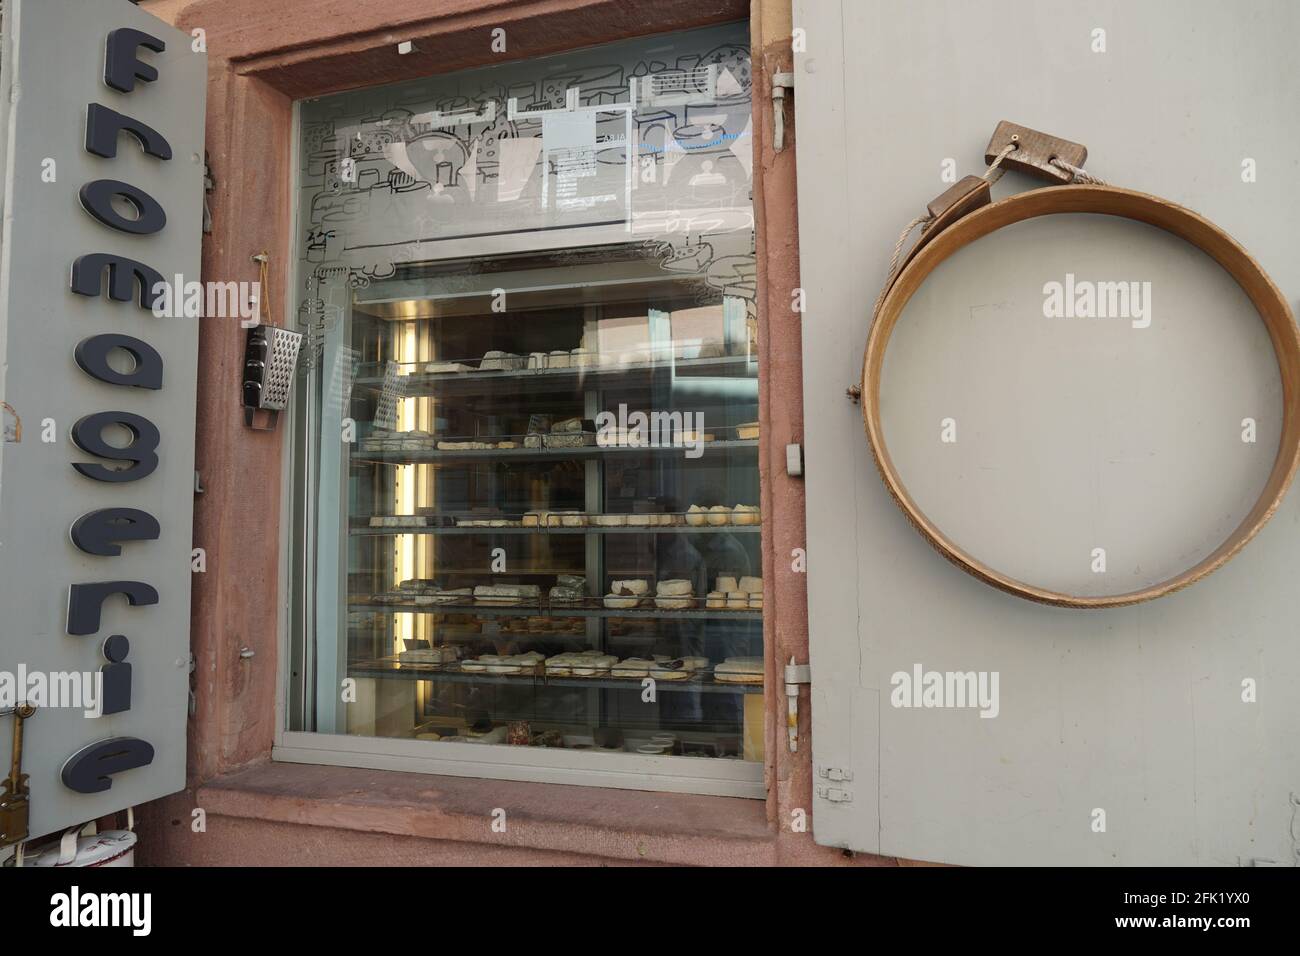 Cheese shop written in French on the facade of the building with shop window with display of different sorts of cheese. Stock Photo